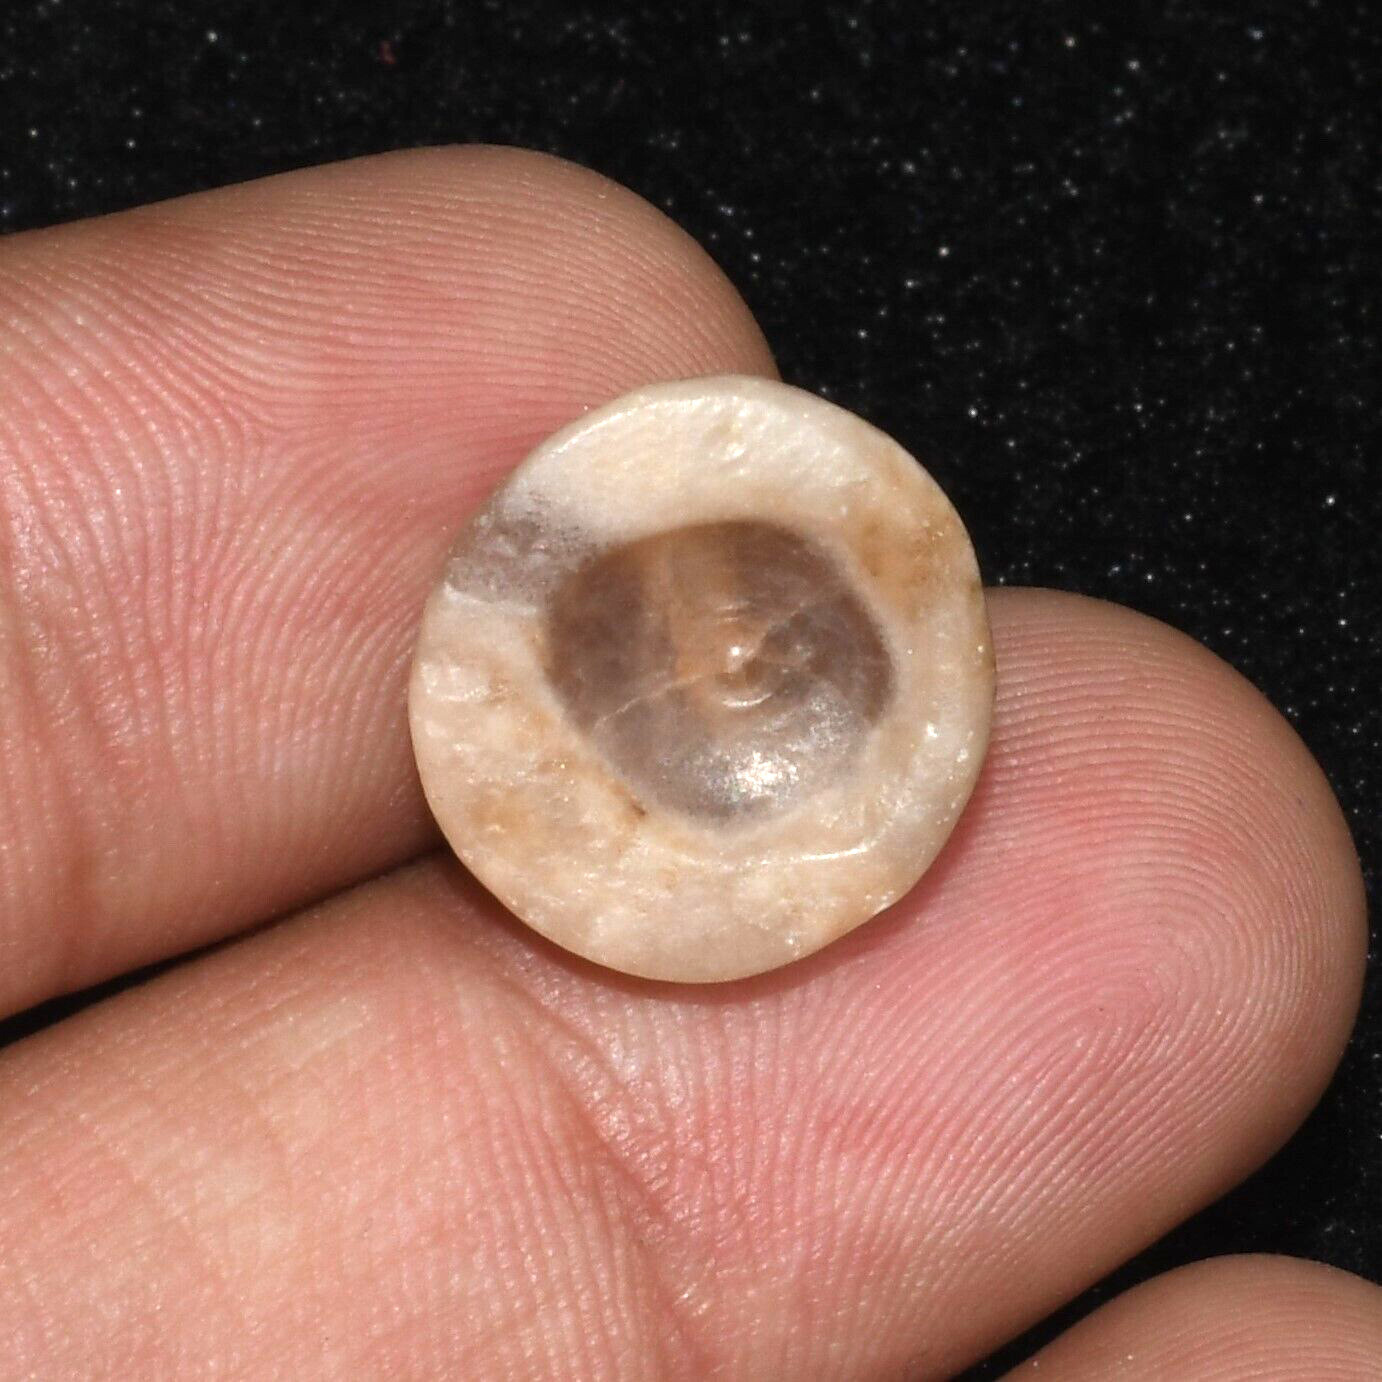 Authentic Ancient Central Asian Agate Stone Luk Mik Eye Bead over 2000 Years Old